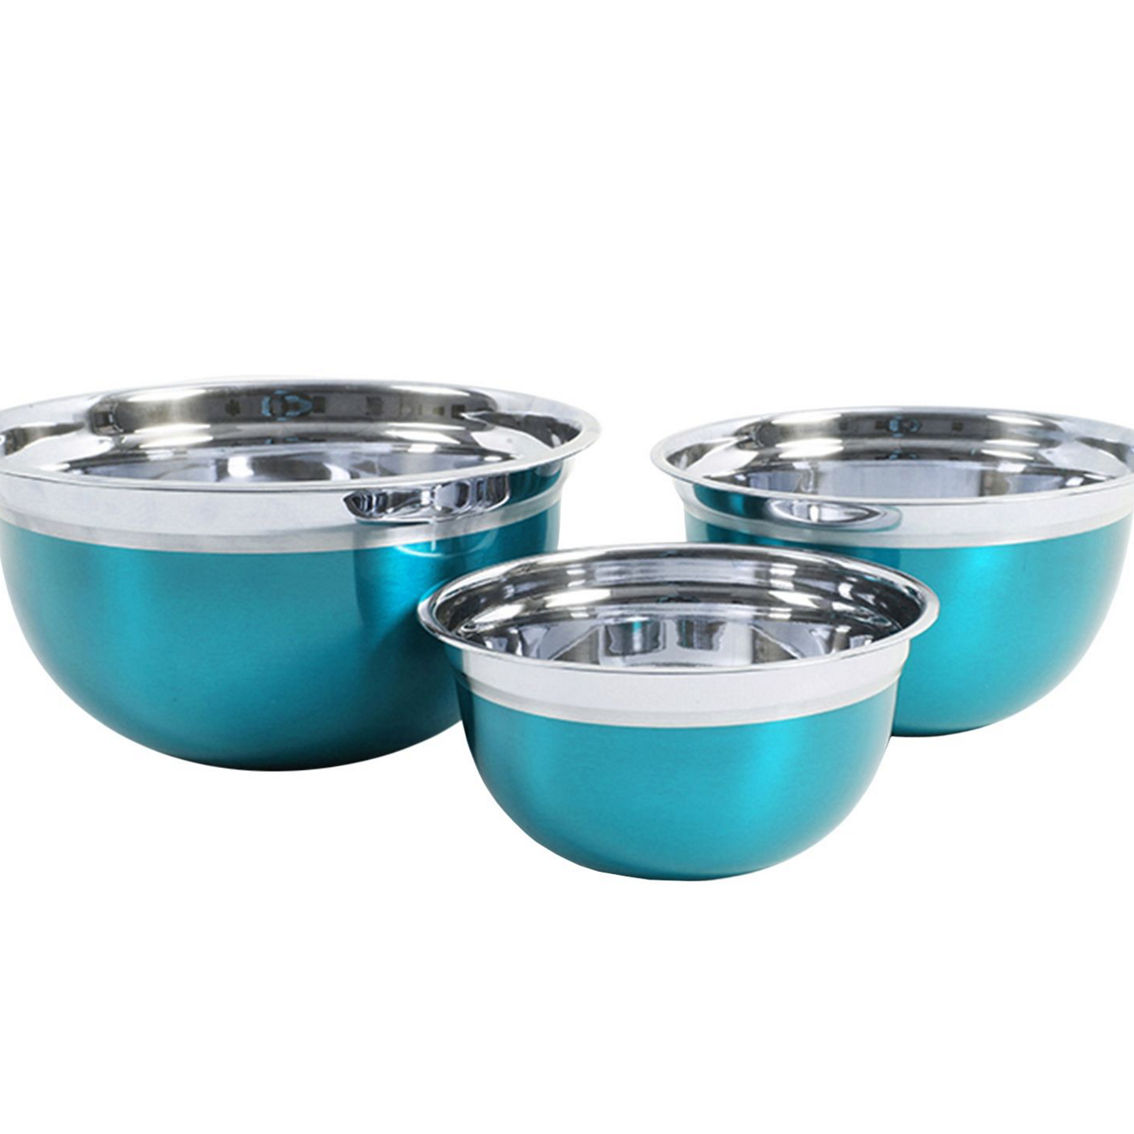 Oster Rosamond 3 Piece Stainless Steel Round Mixing Bowls in Turquoise - Image 2 of 4